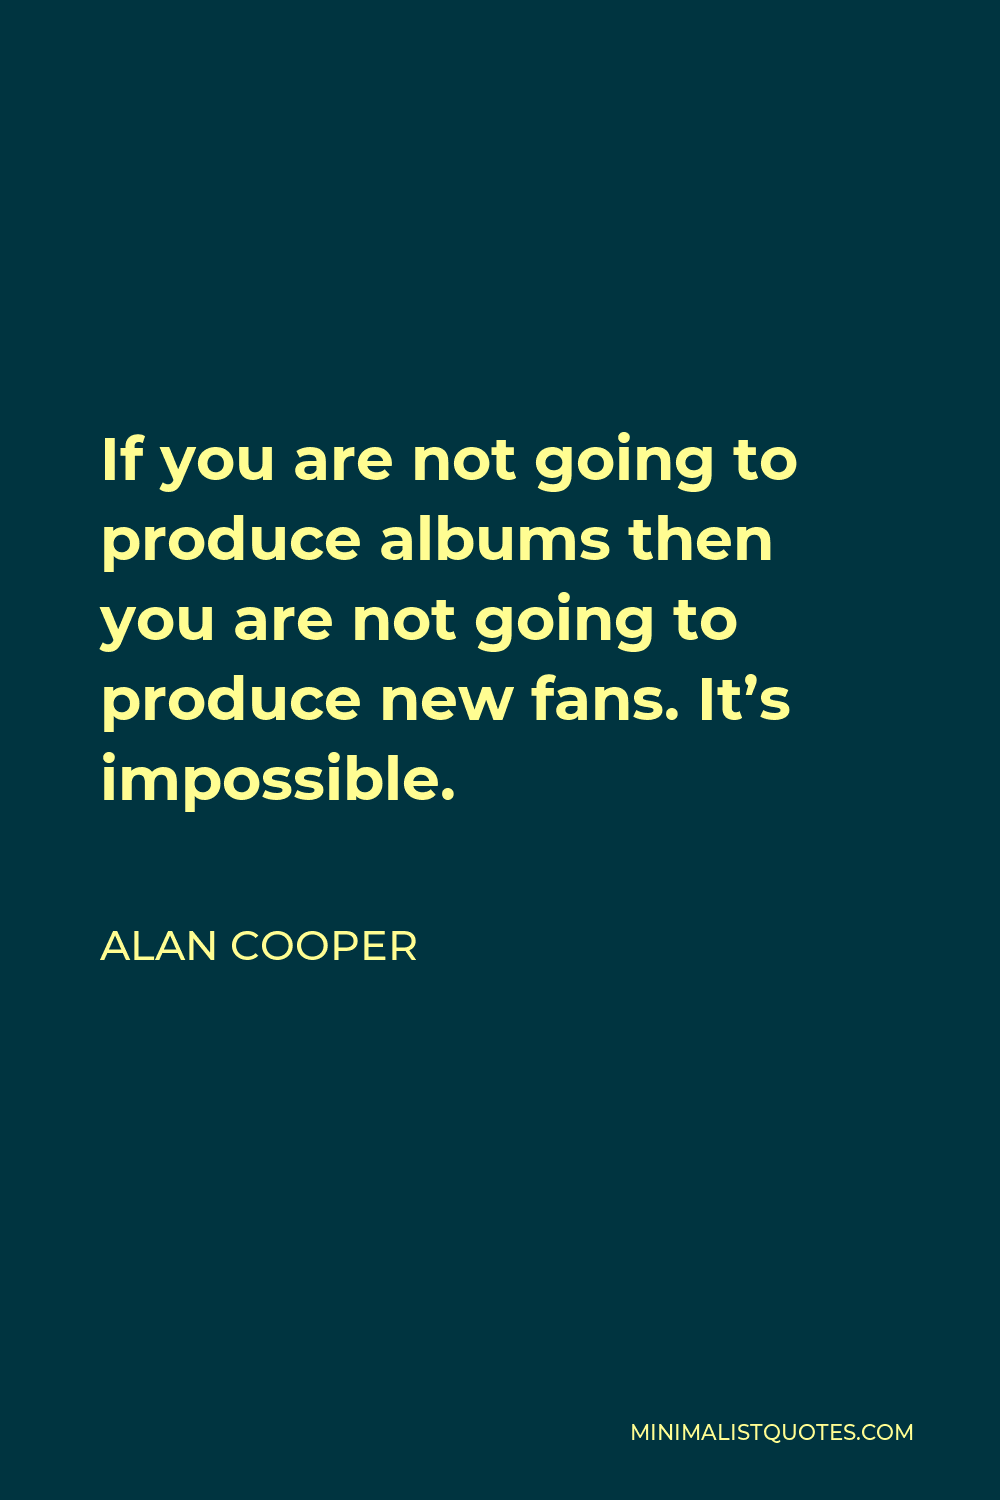 Alan Cooper Quote - If you are not going to produce albums then you are not going to produce new fans. It’s impossible.